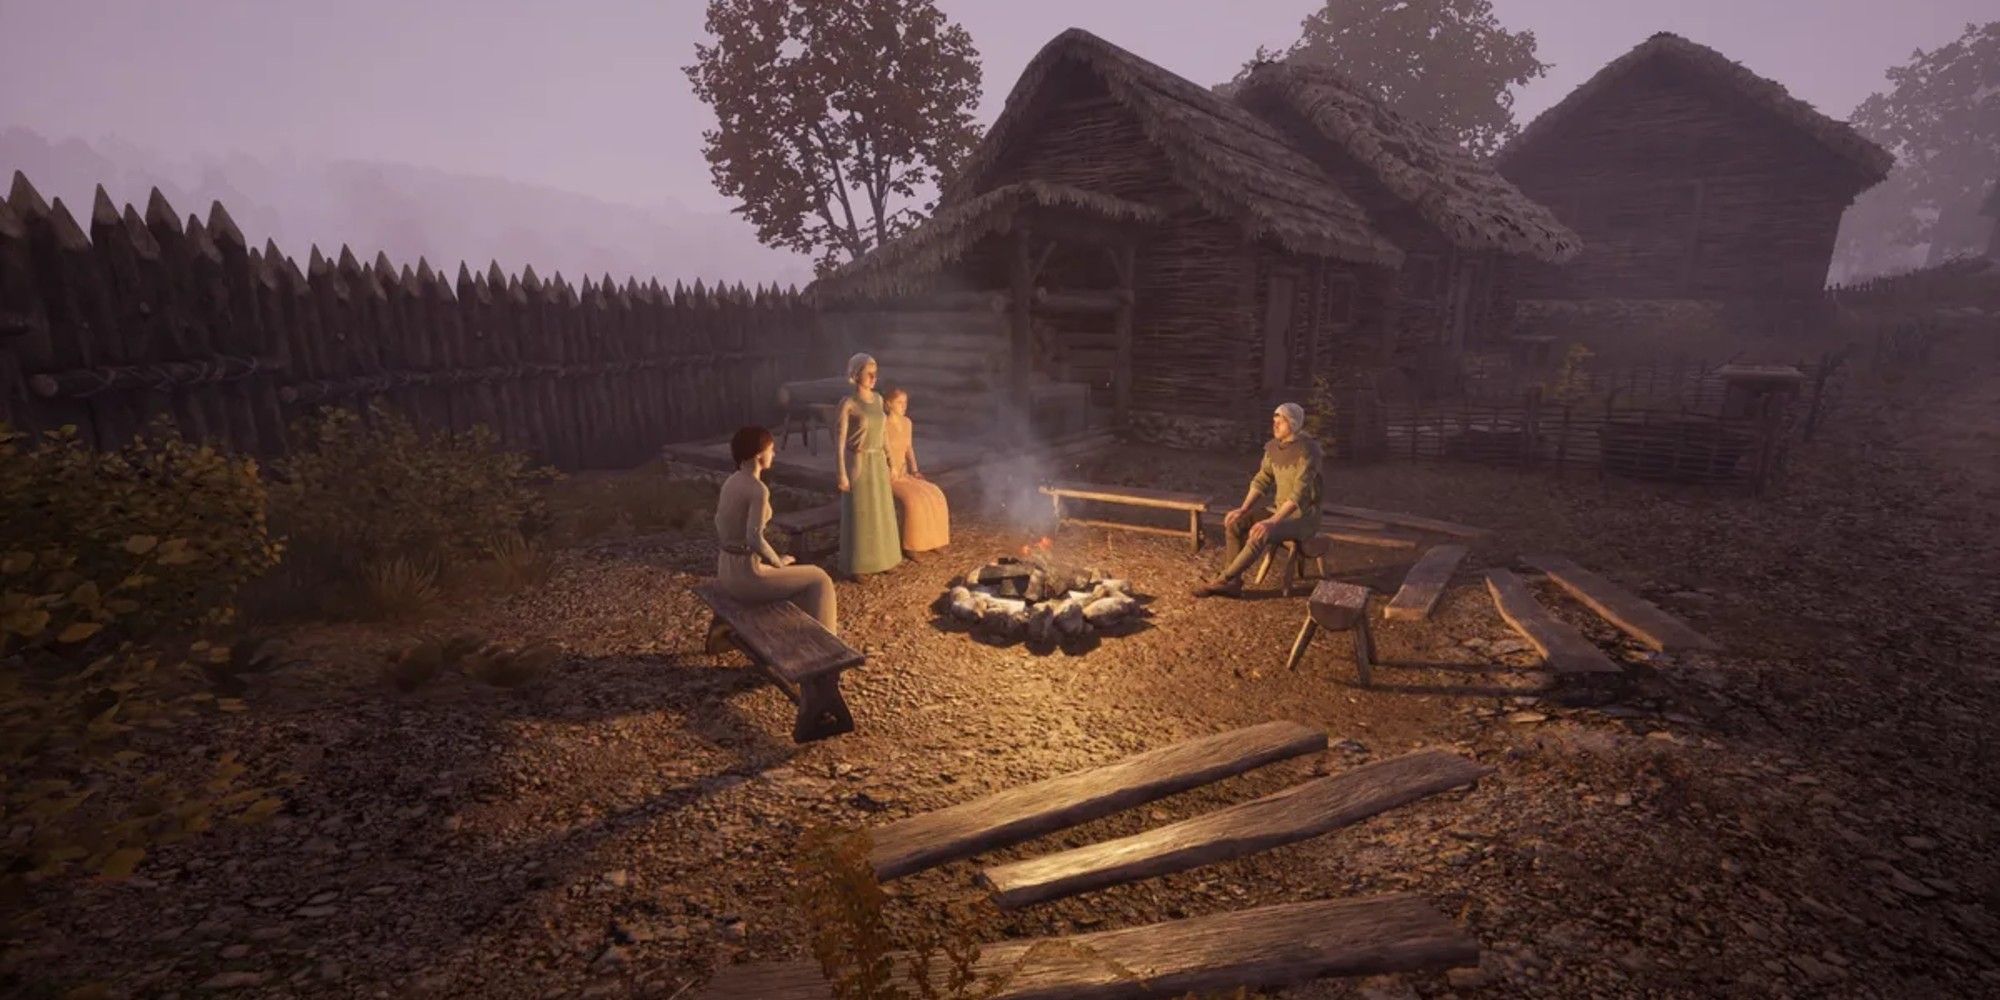 villagers around a campfire in a guest house on a foggy day